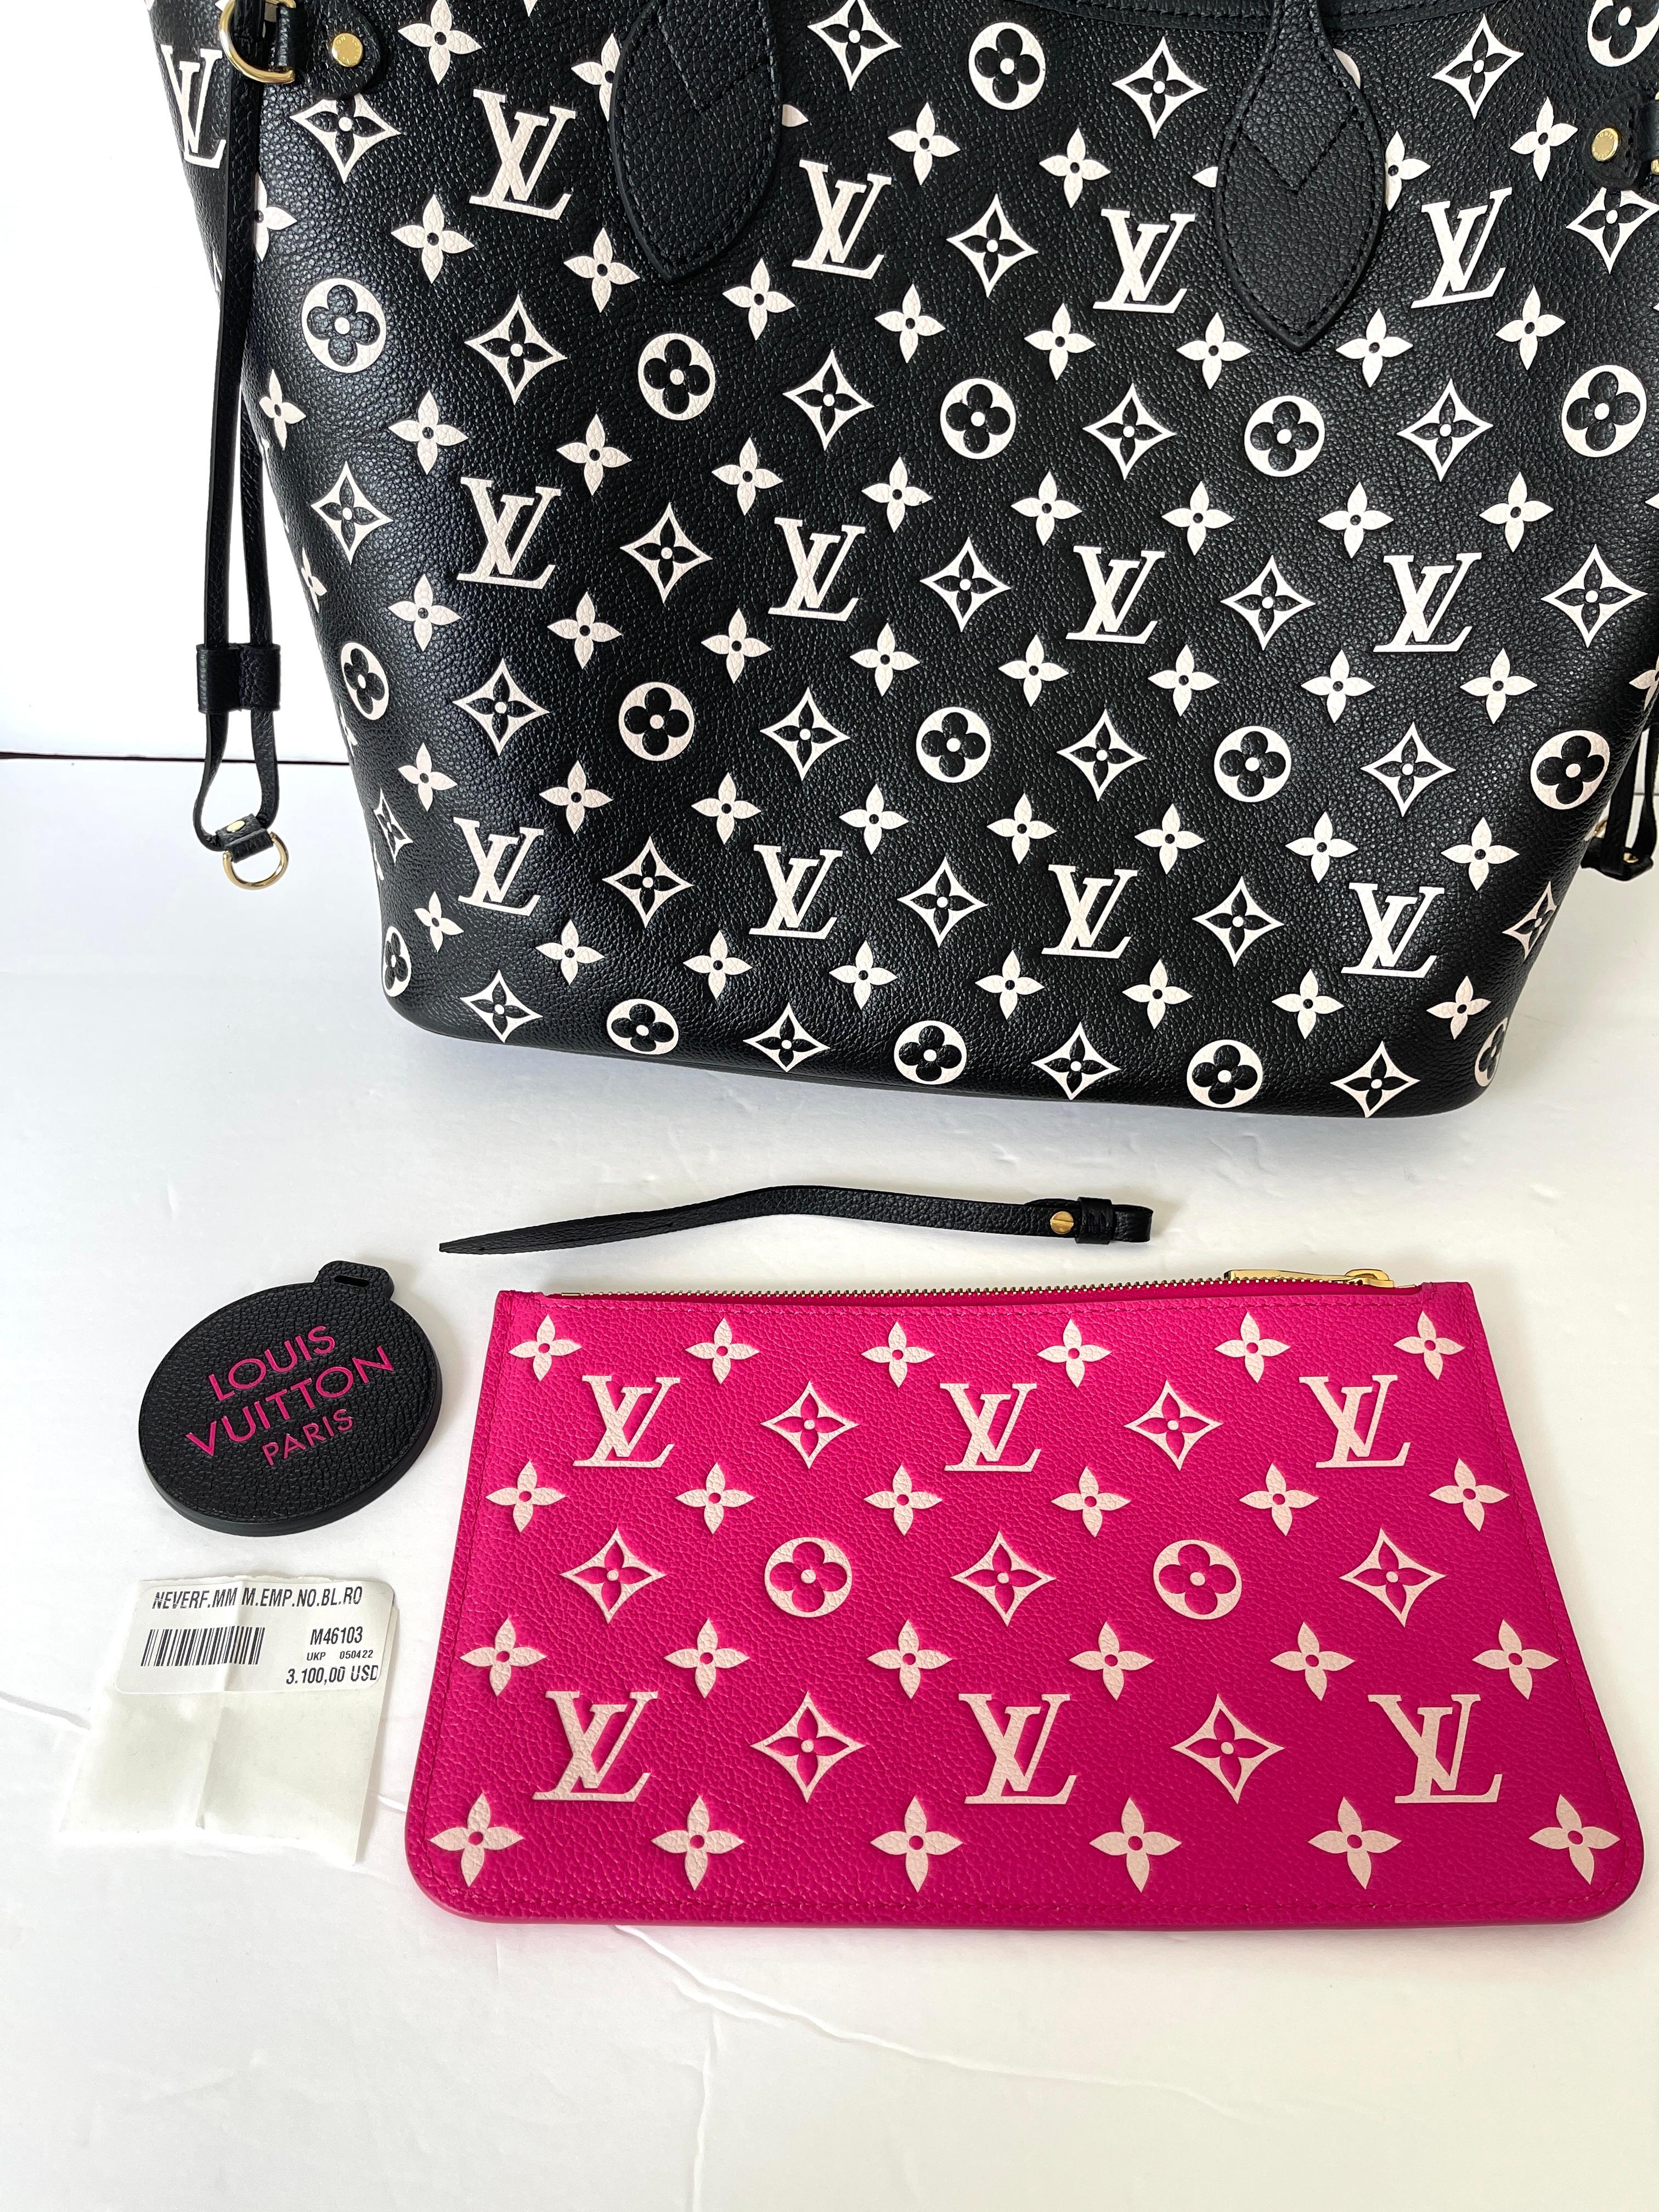 Louis Vuitton Neverfull Black White Empriente Leather M46103 NEVERFULL MM 2